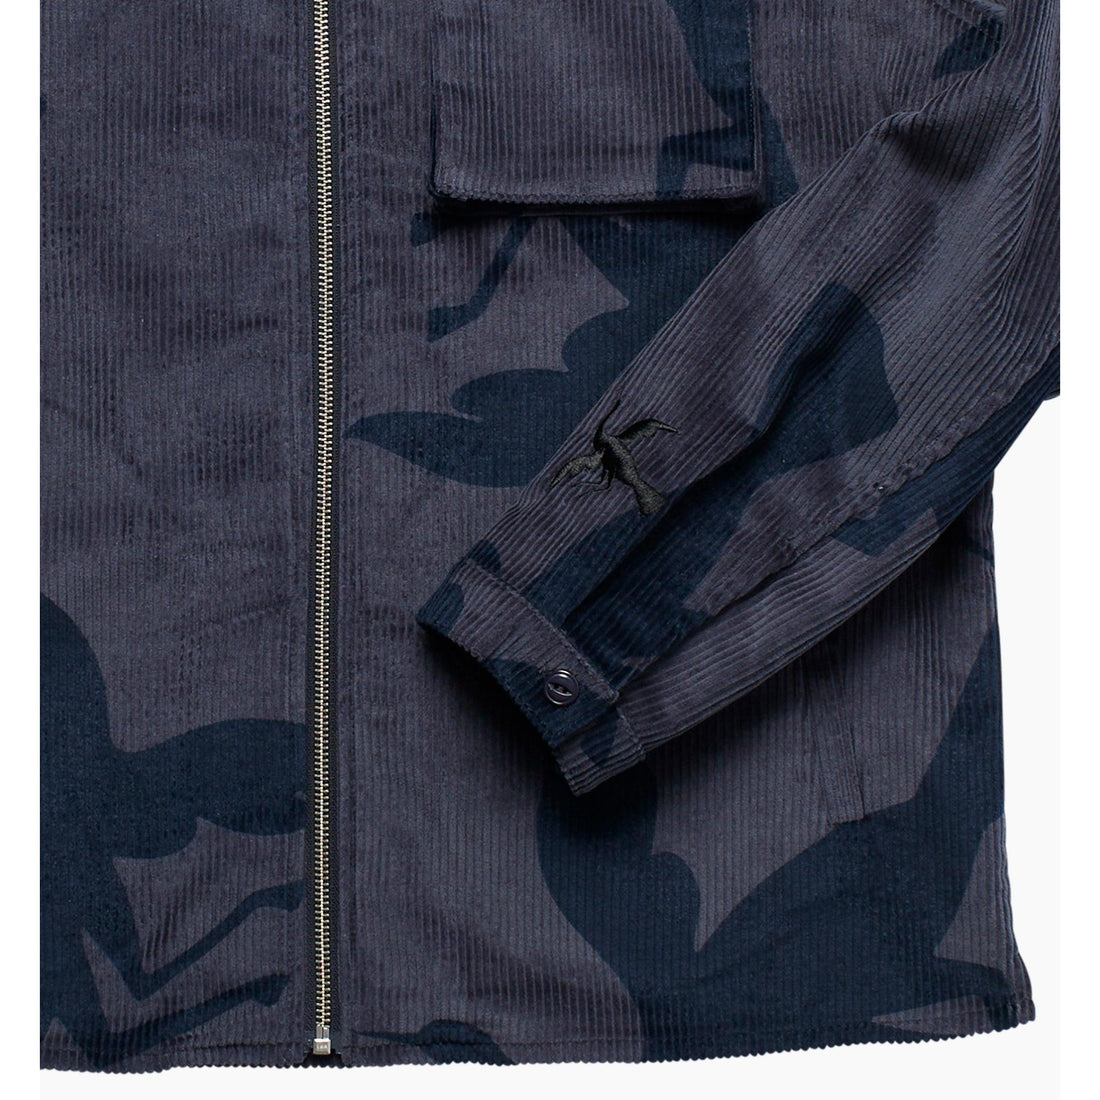 BY PARRA - CLIPPED WINGS SHIRT JACKET - GREYISH BLUE